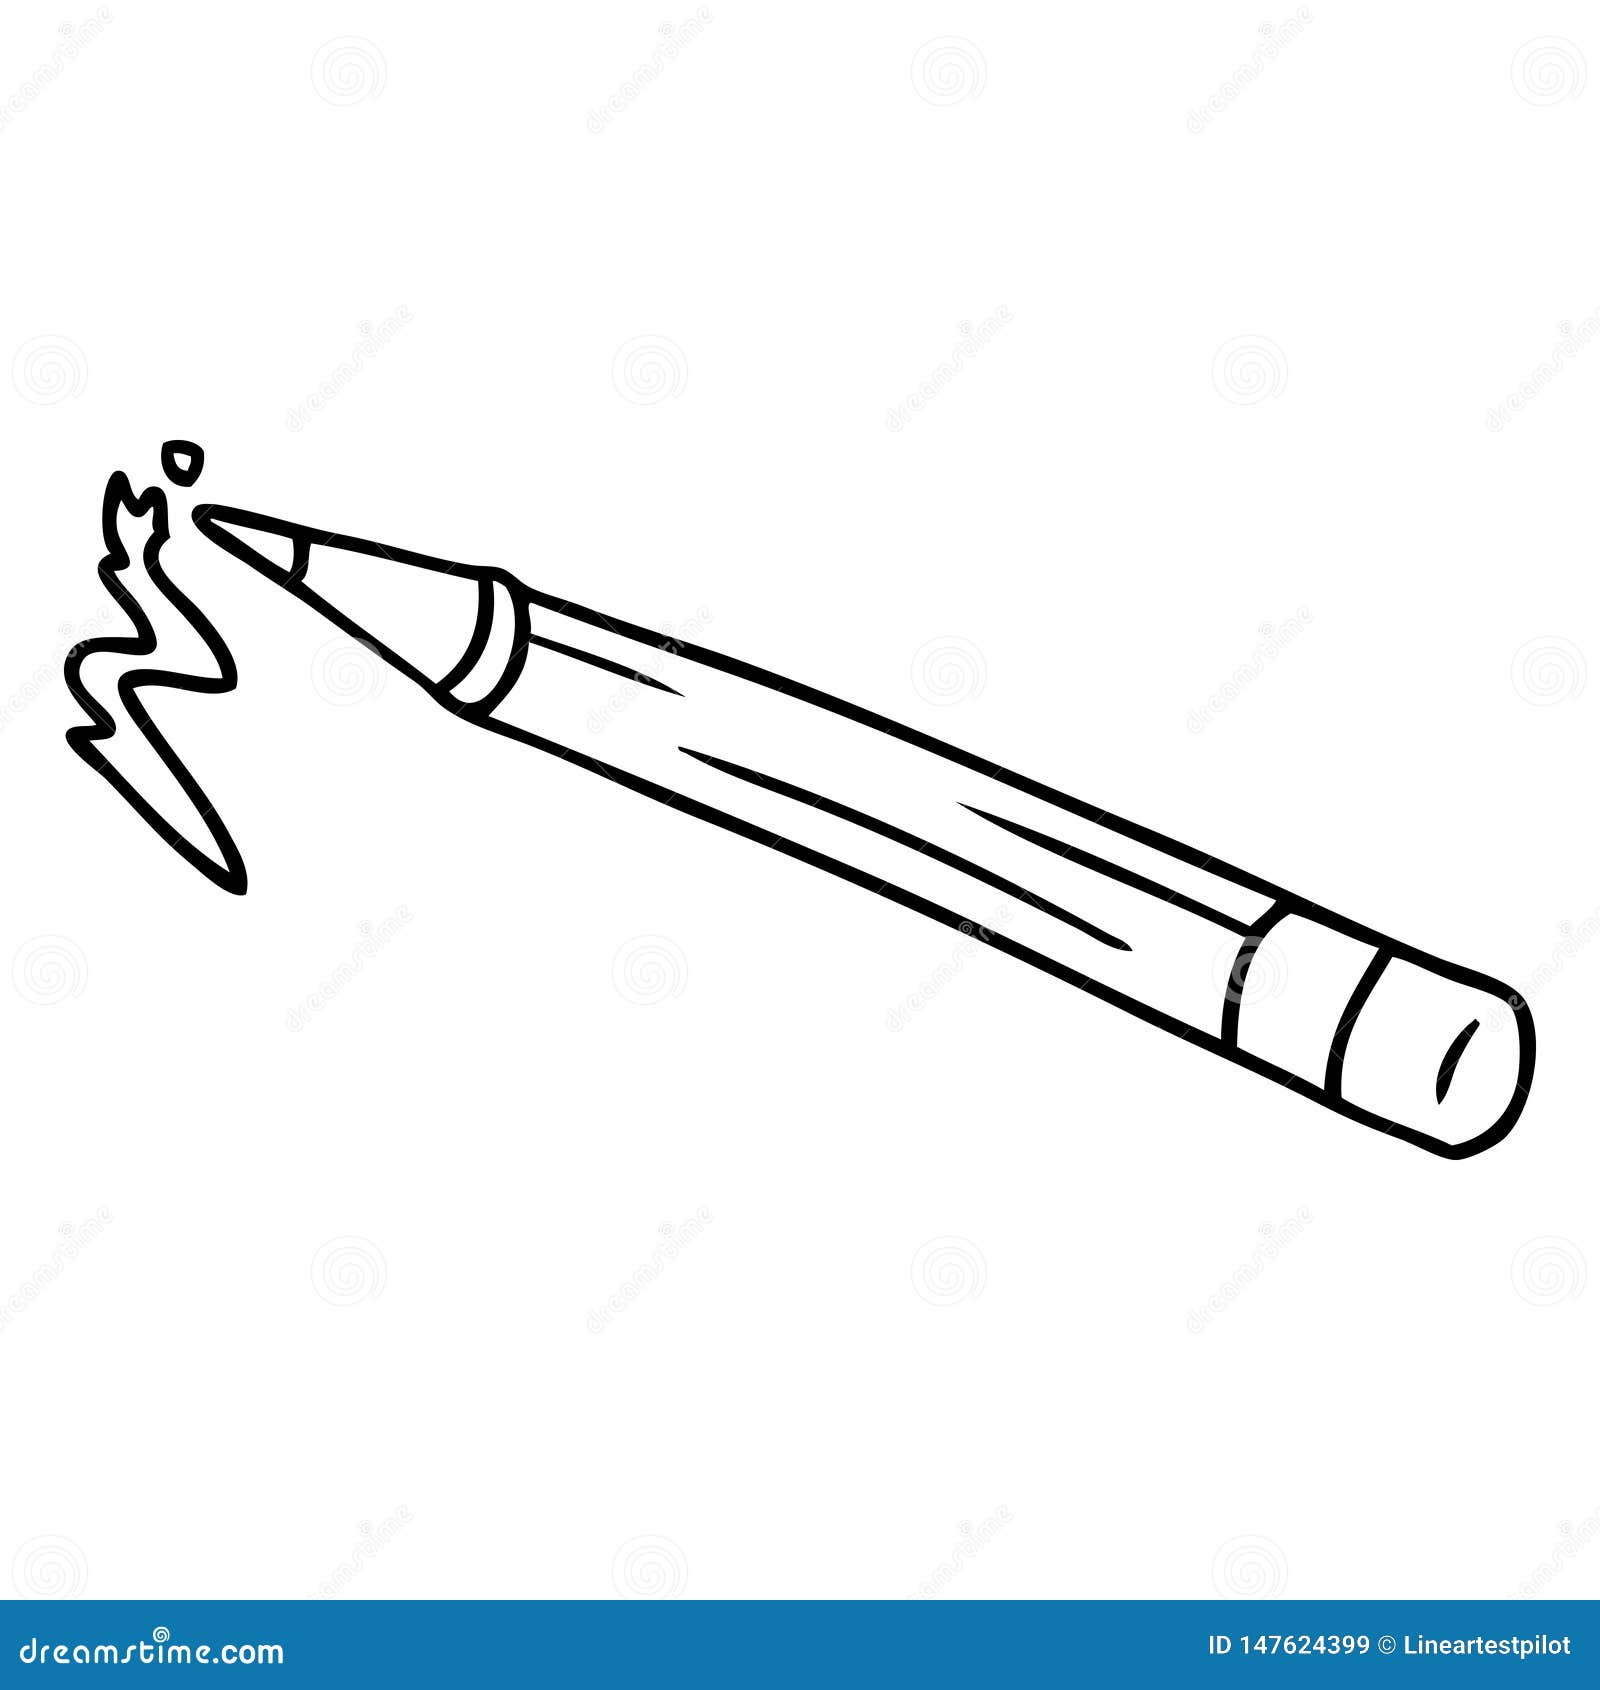 Line Drawing Doodle Of A Coloured Pencil Stock Vector Illustration of